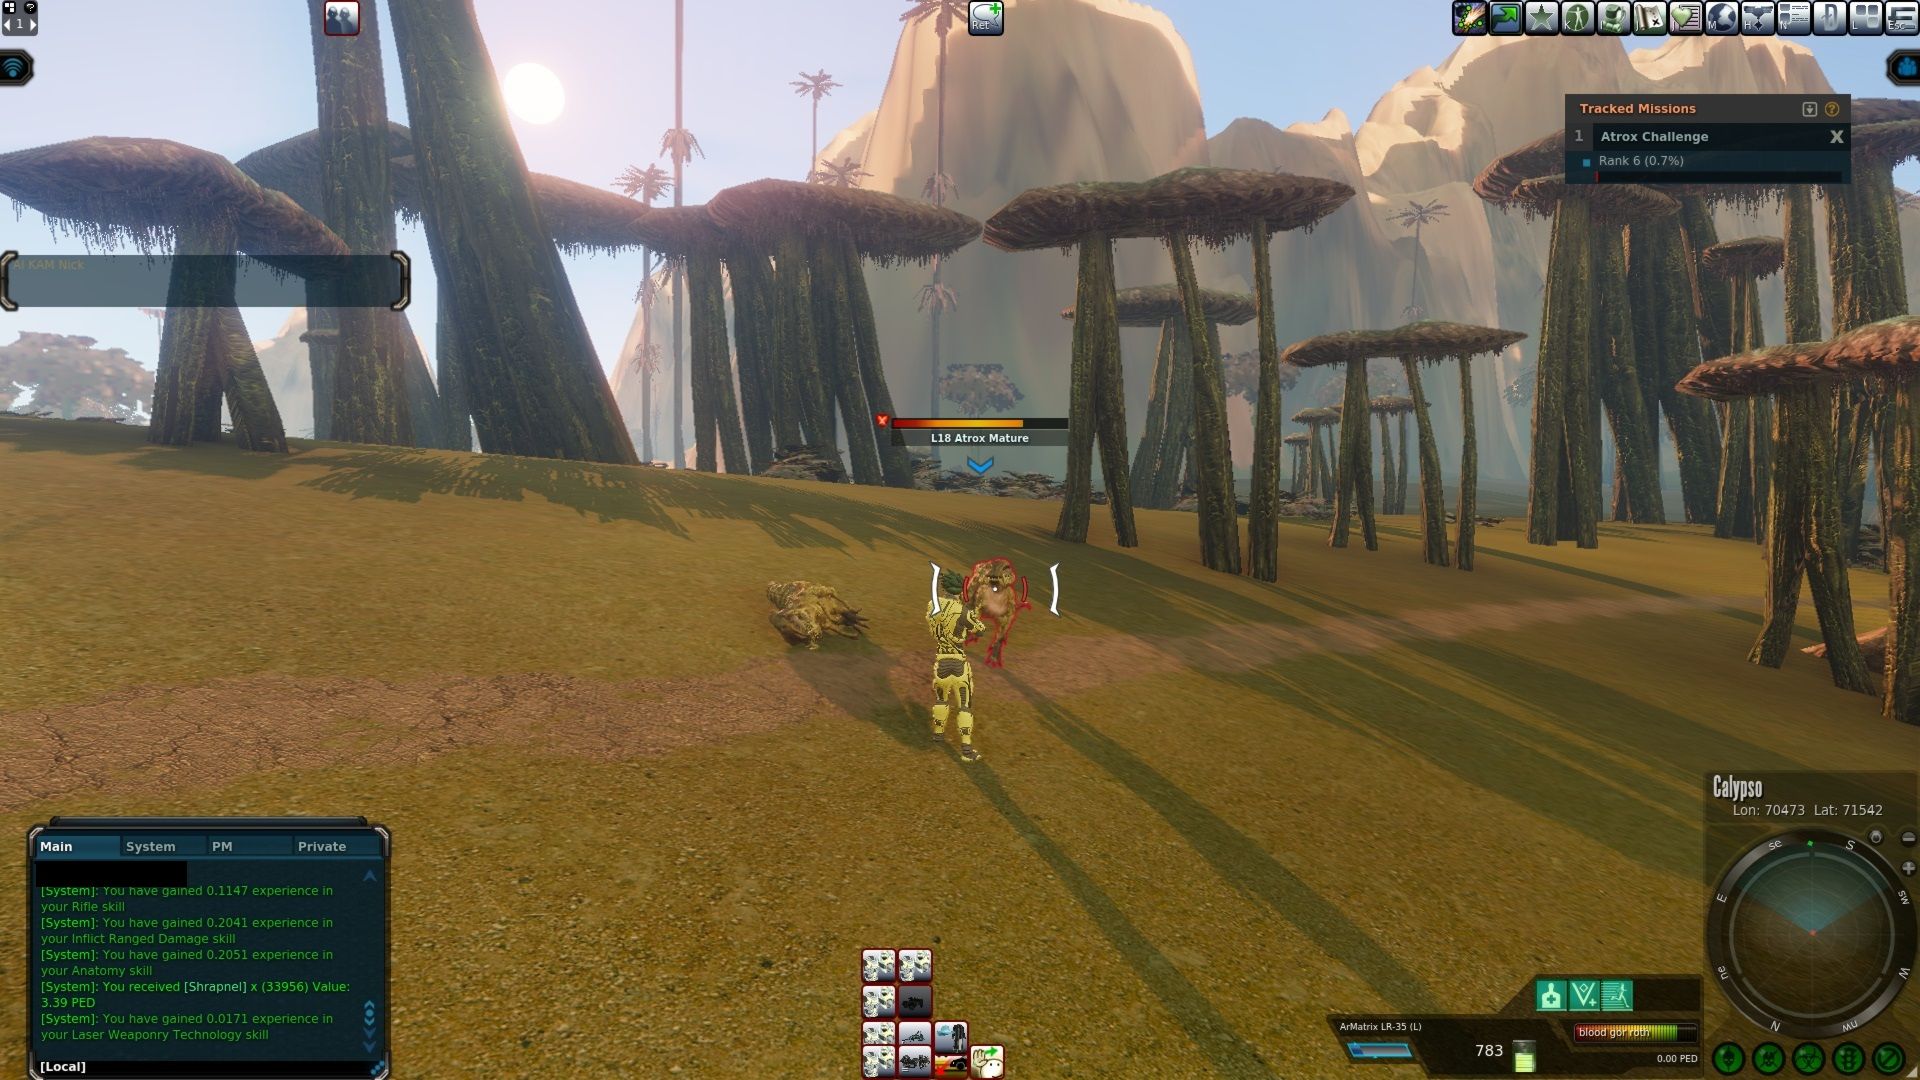 Further in the Atrox mushroom forest I went in Entropia Universe.jpg